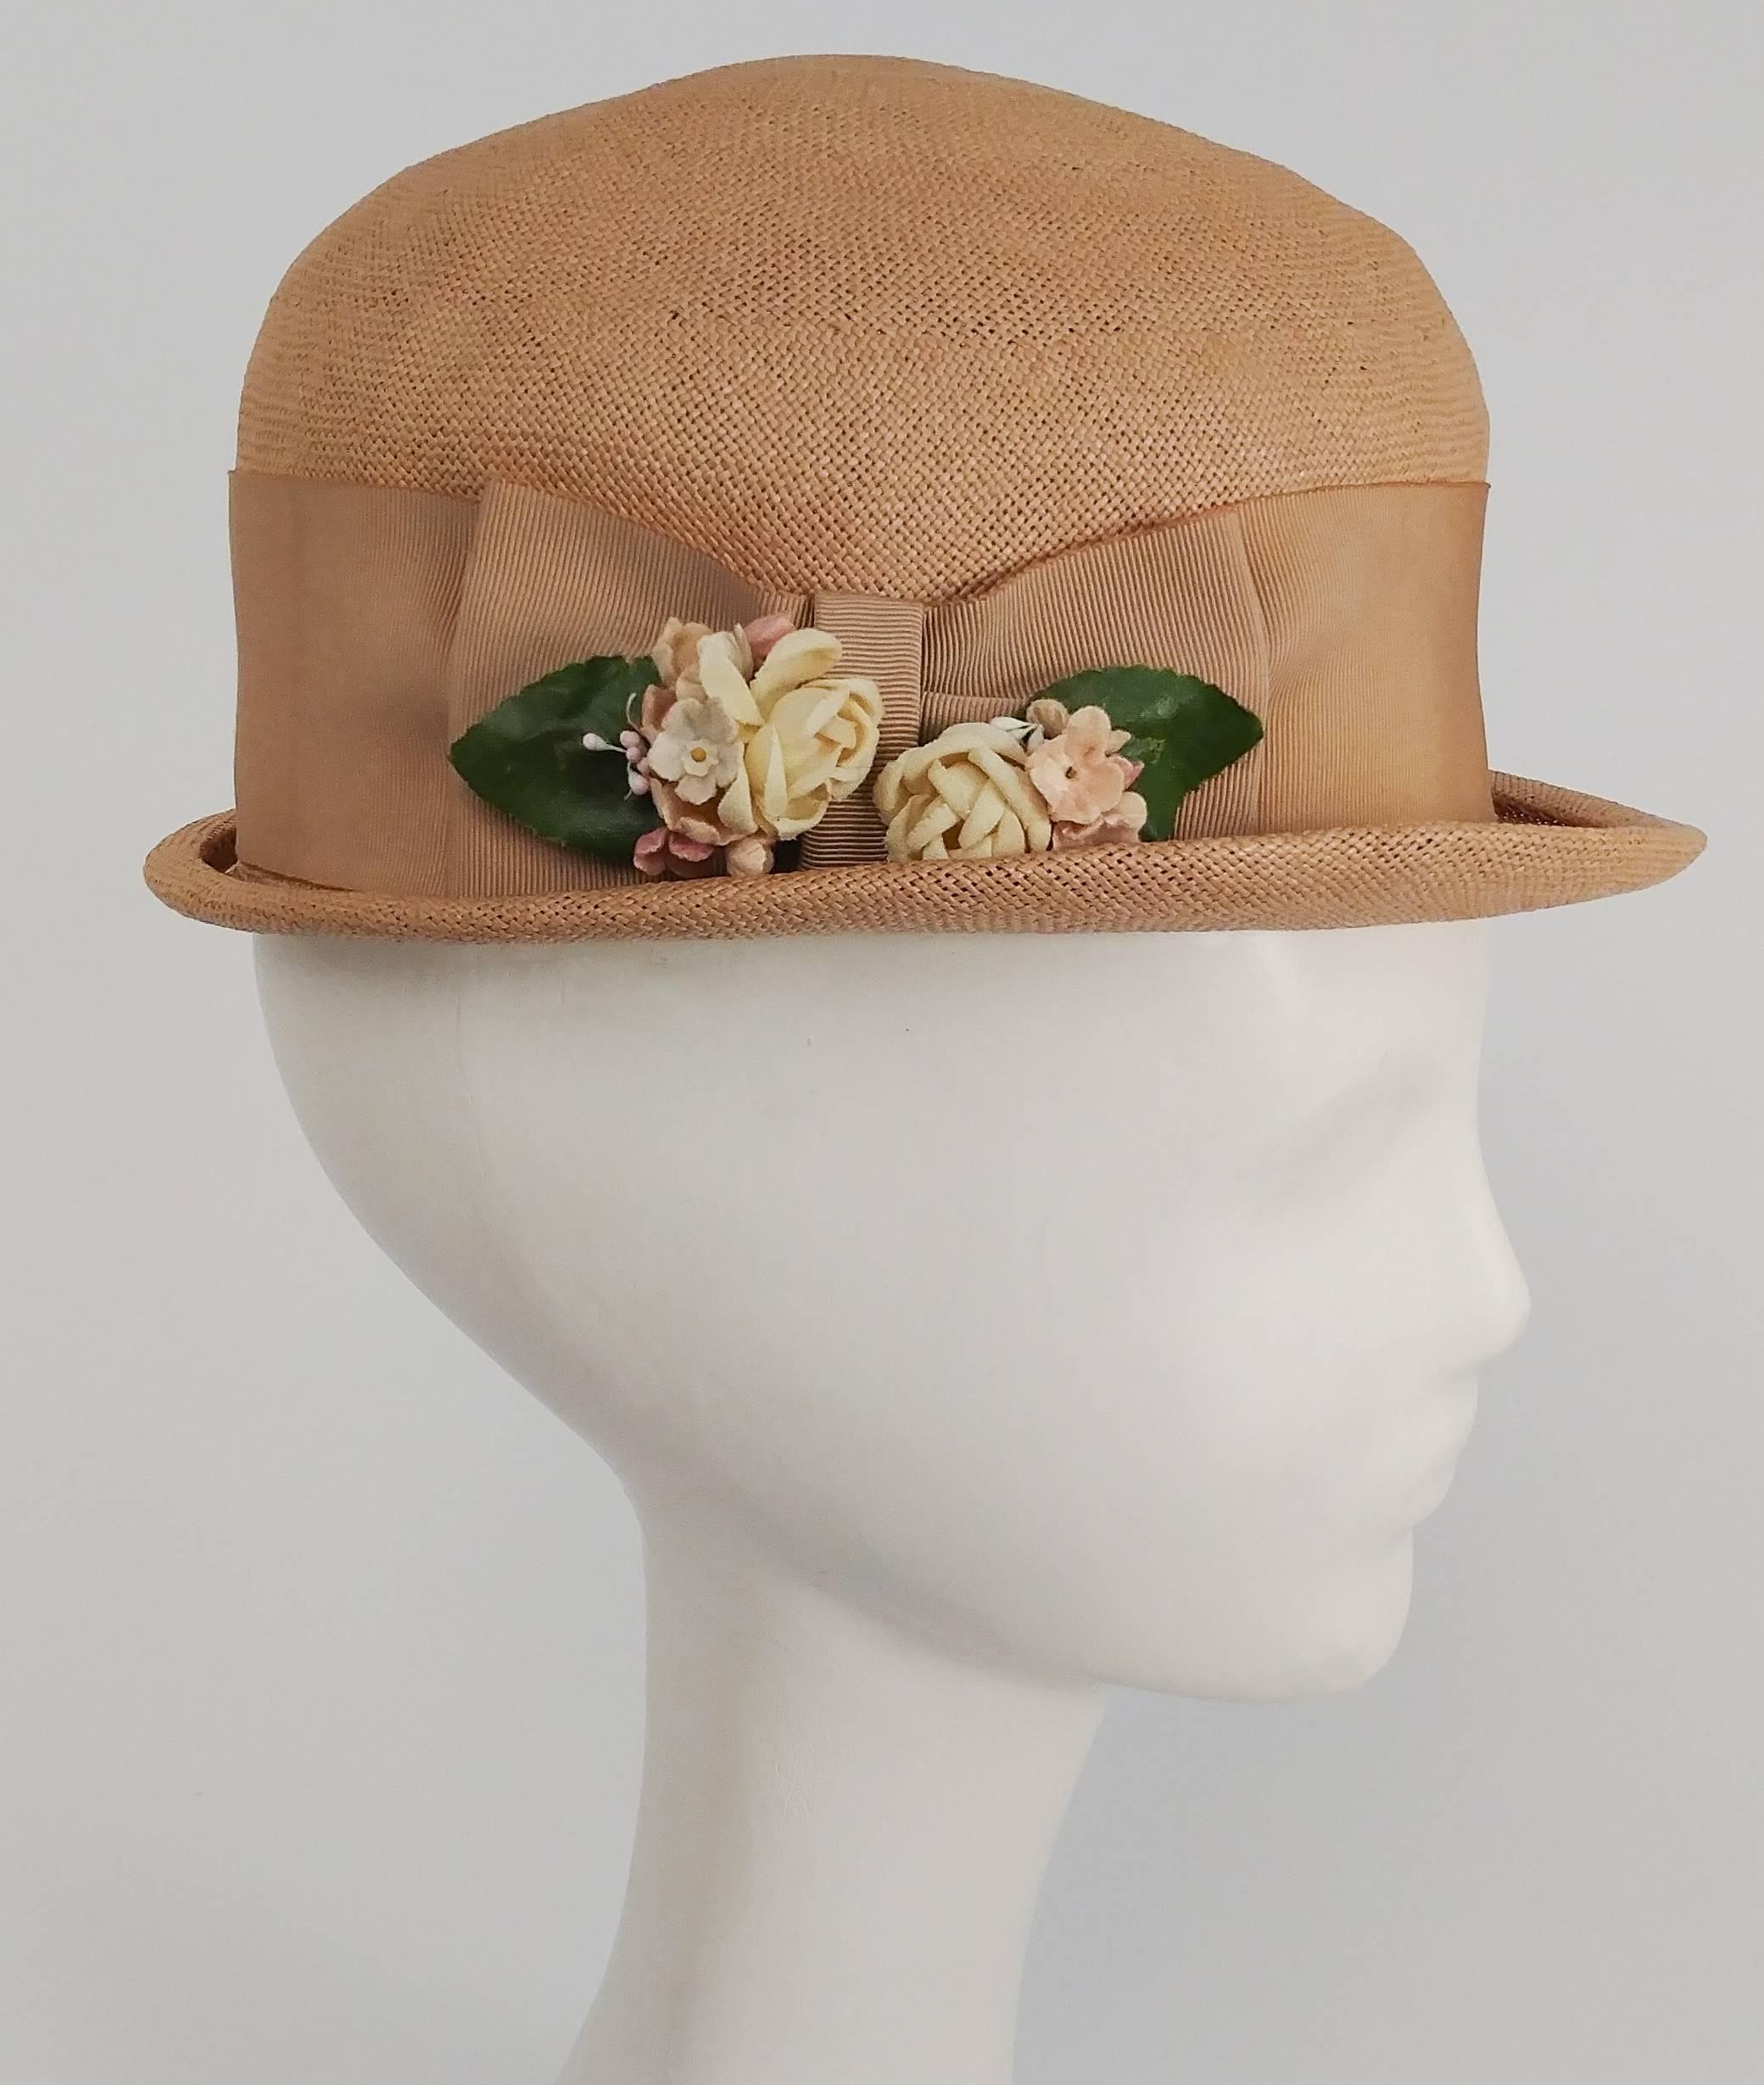 1930s Woven Straw Hat w/ Wide Ribbon. Decorated with small flowers in band. 